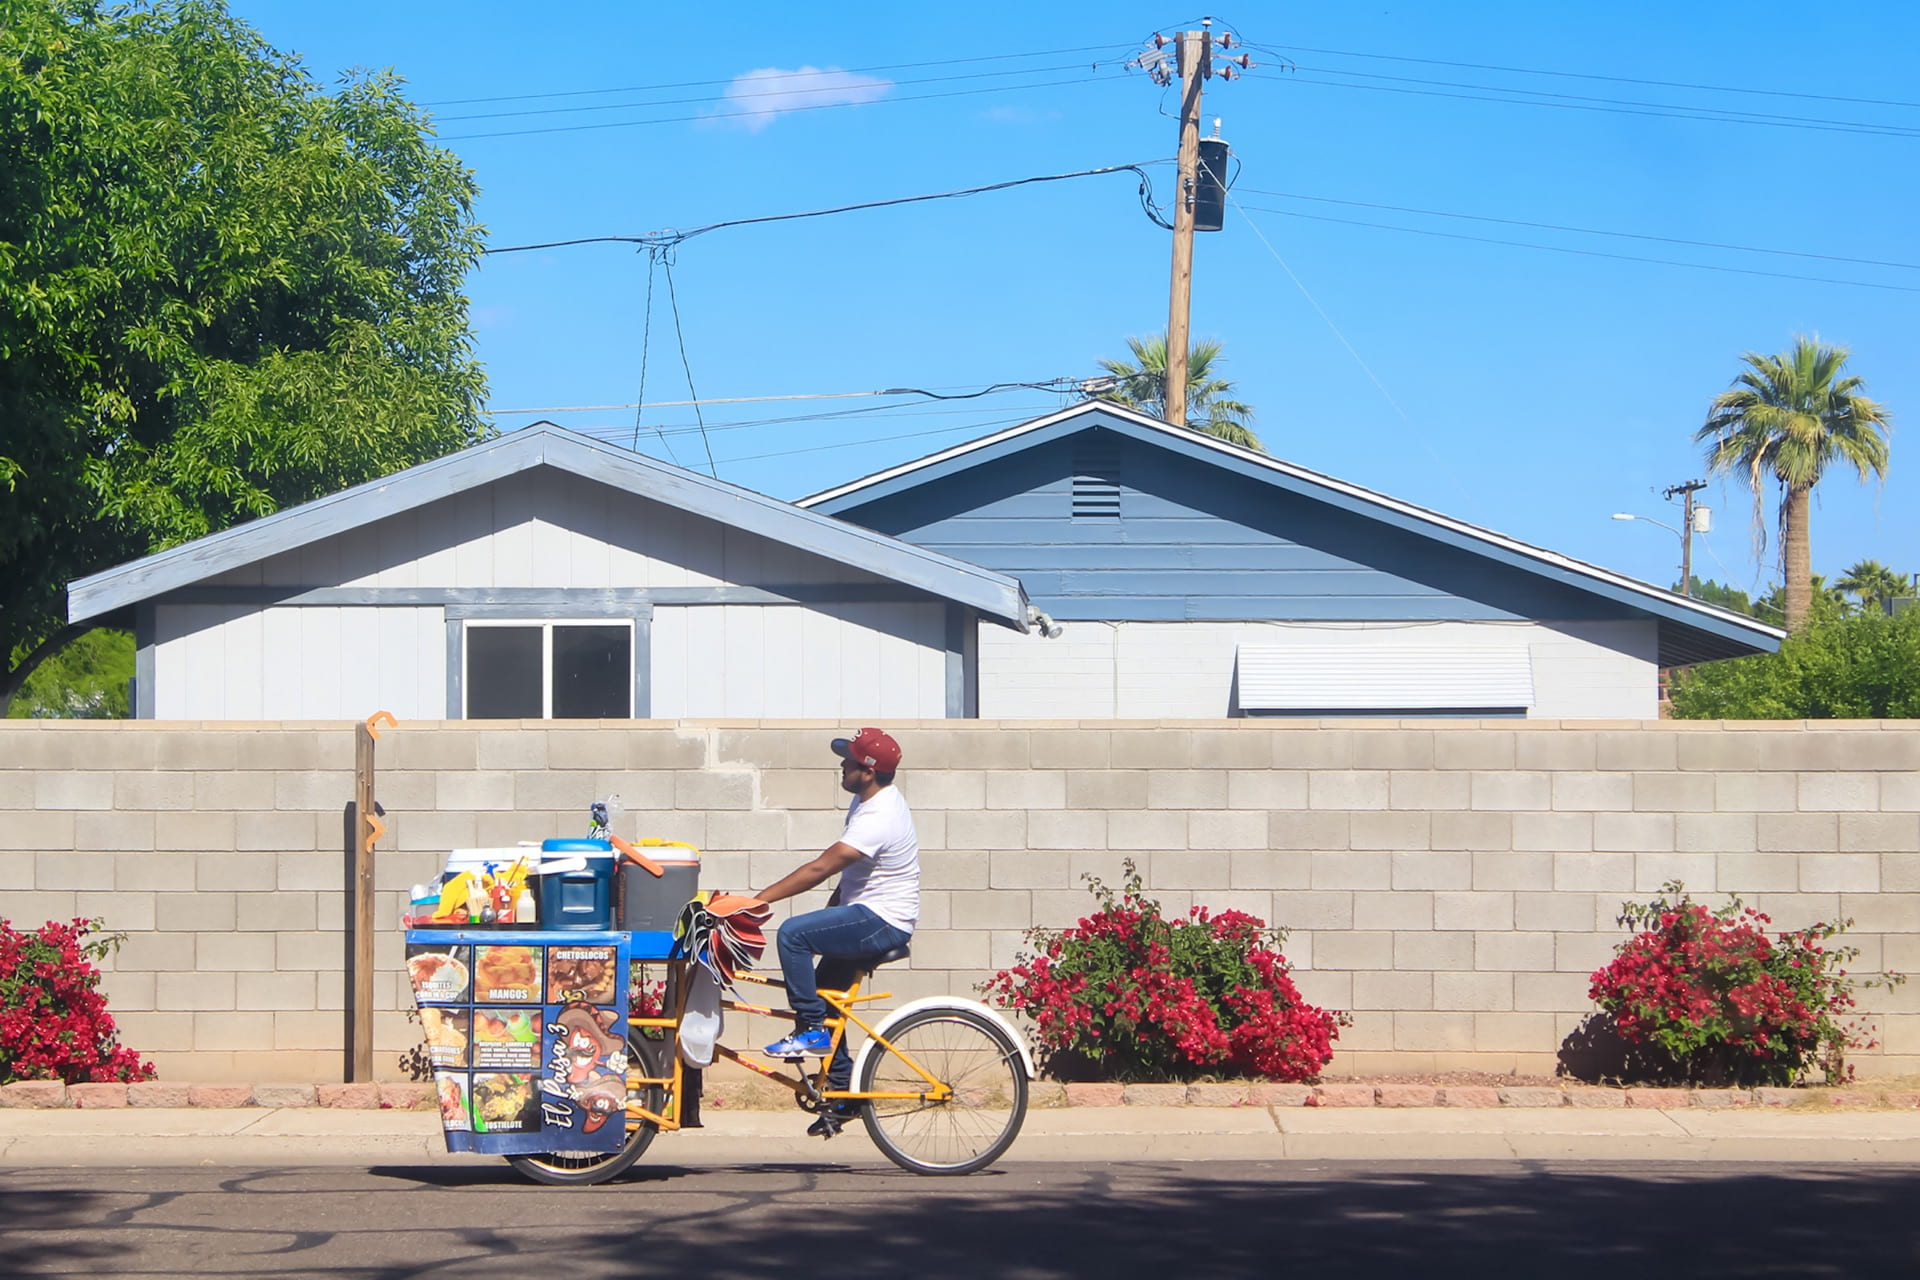 A person cycling past a house with a full cart on the front of the bike, almost as big as the bike